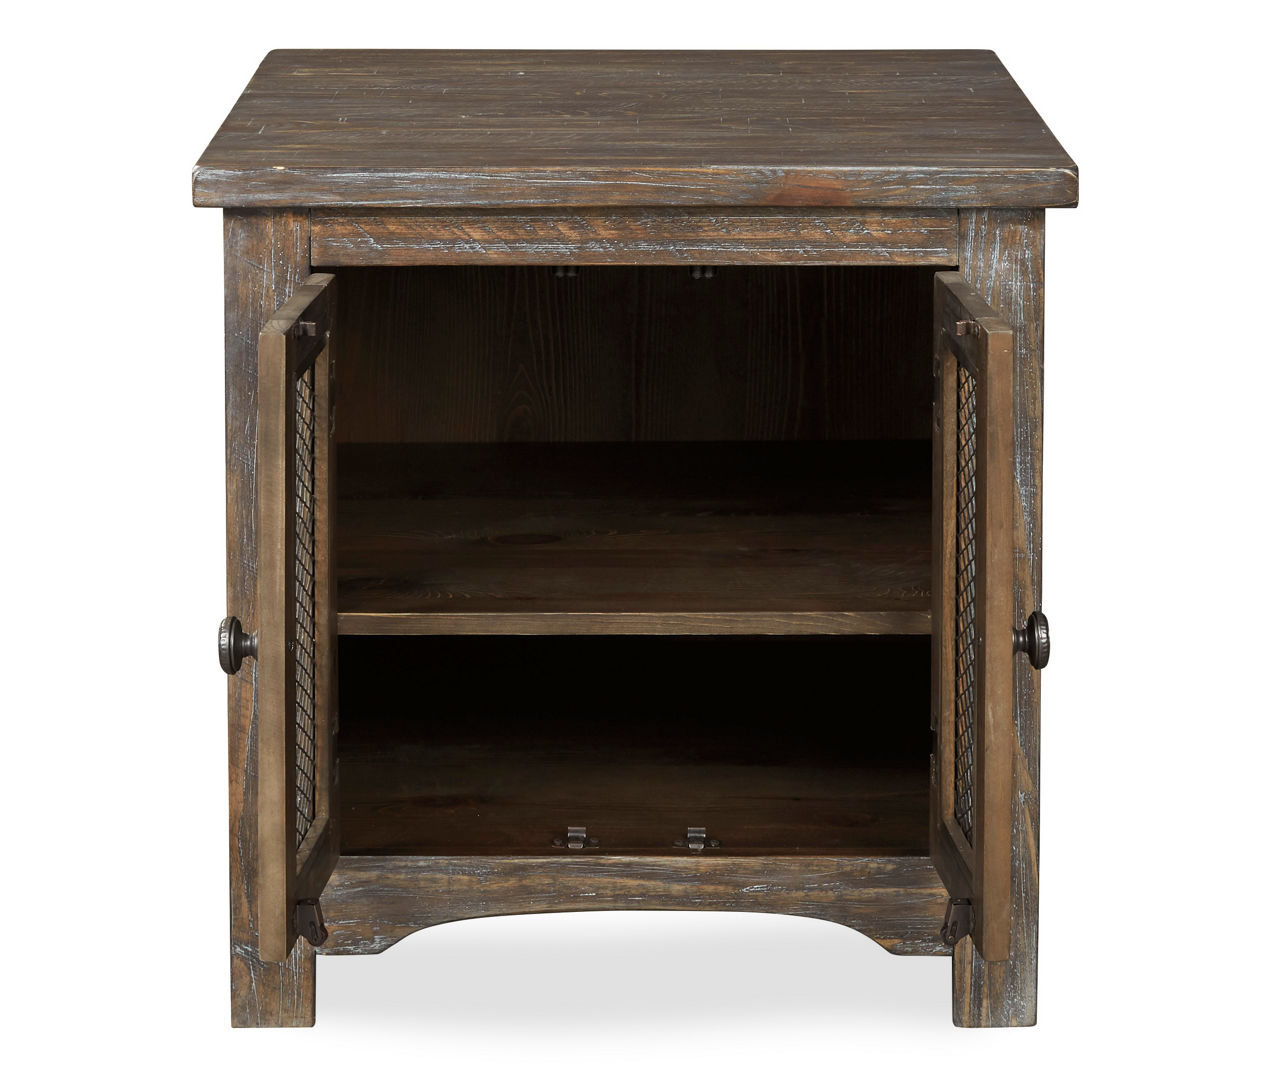 Signature Design By Ashley Danell Ridge Brown 2-Door End Table | Big Lots